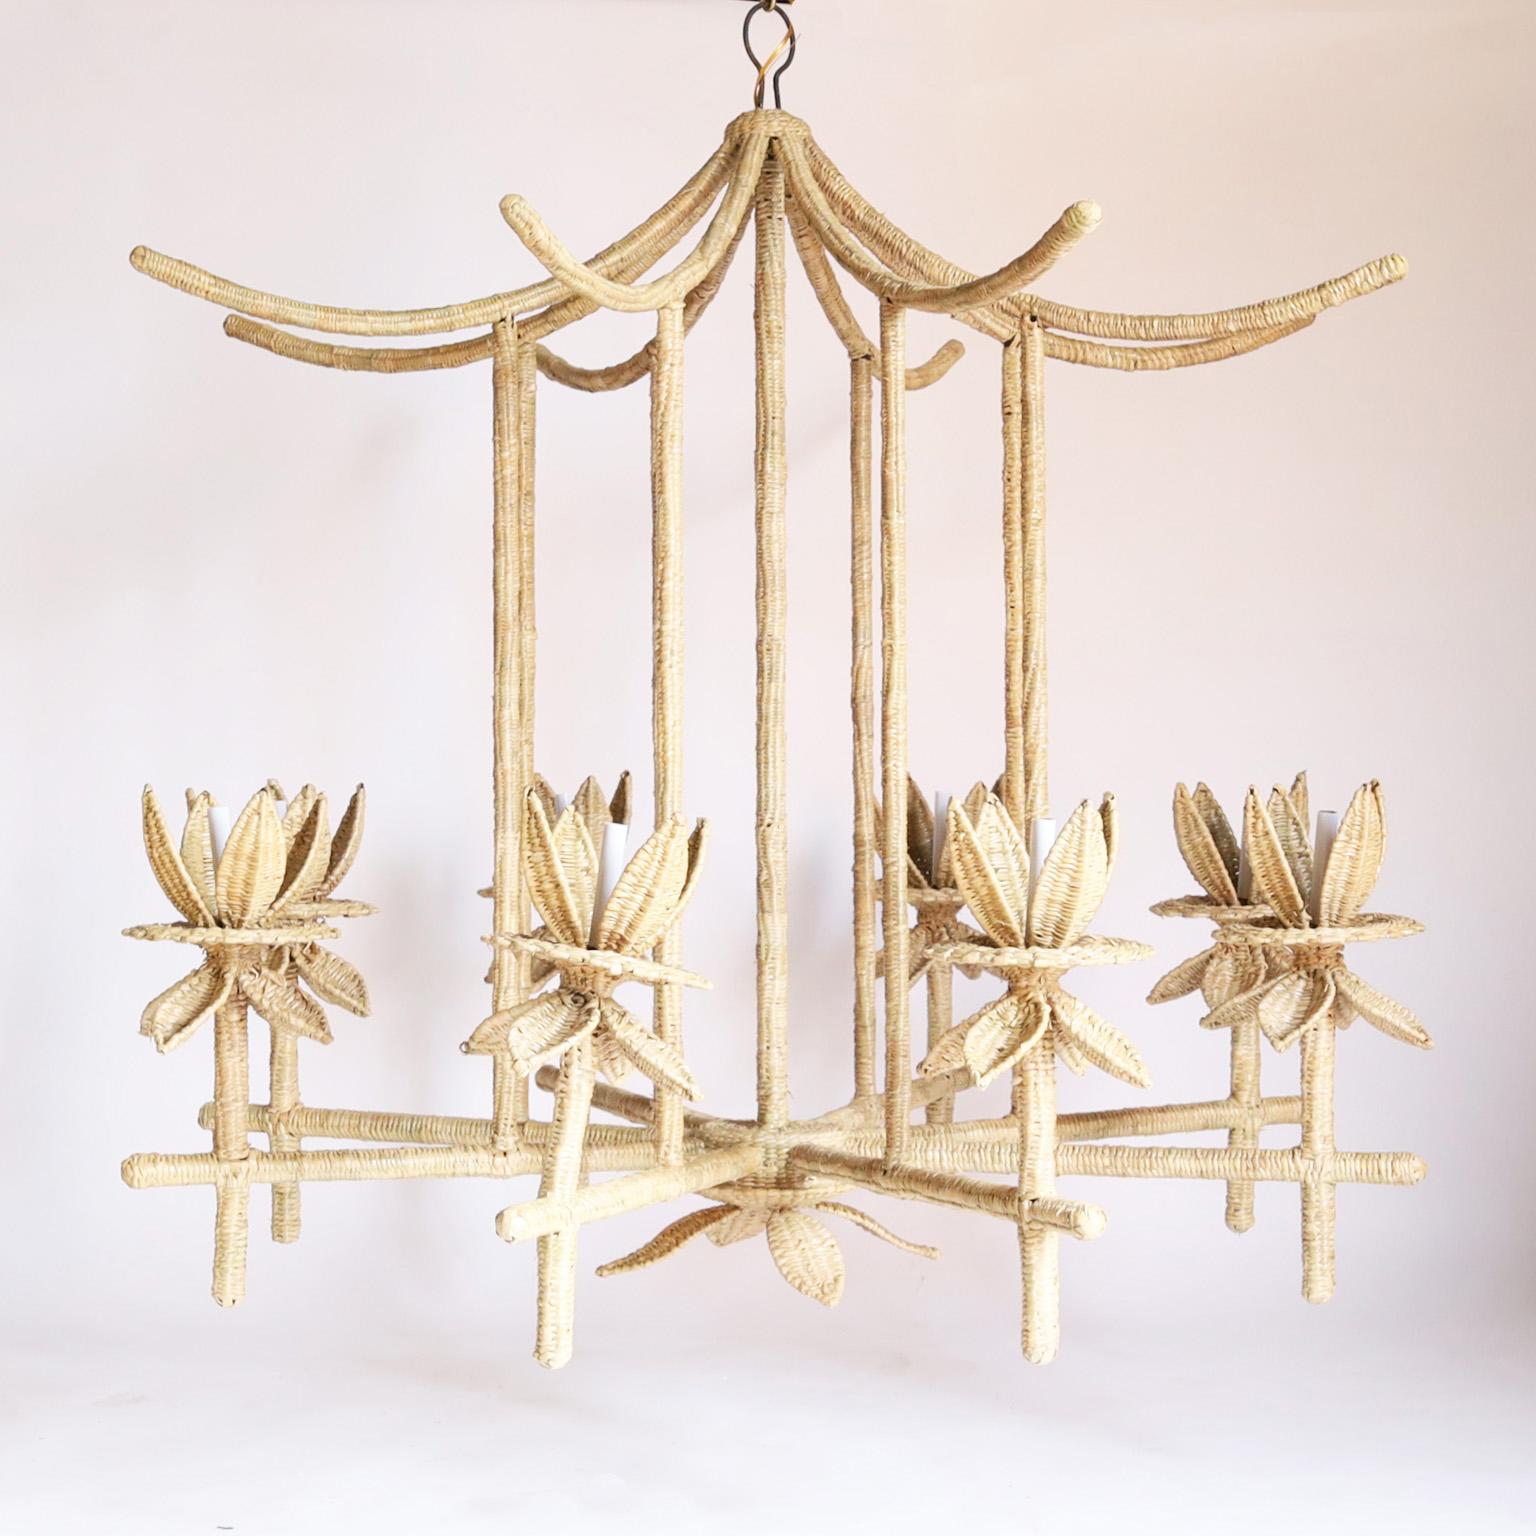 Mexican Seychelles Woven Reed Pagoda Form Chandelier from the FS Flores Collection For Sale